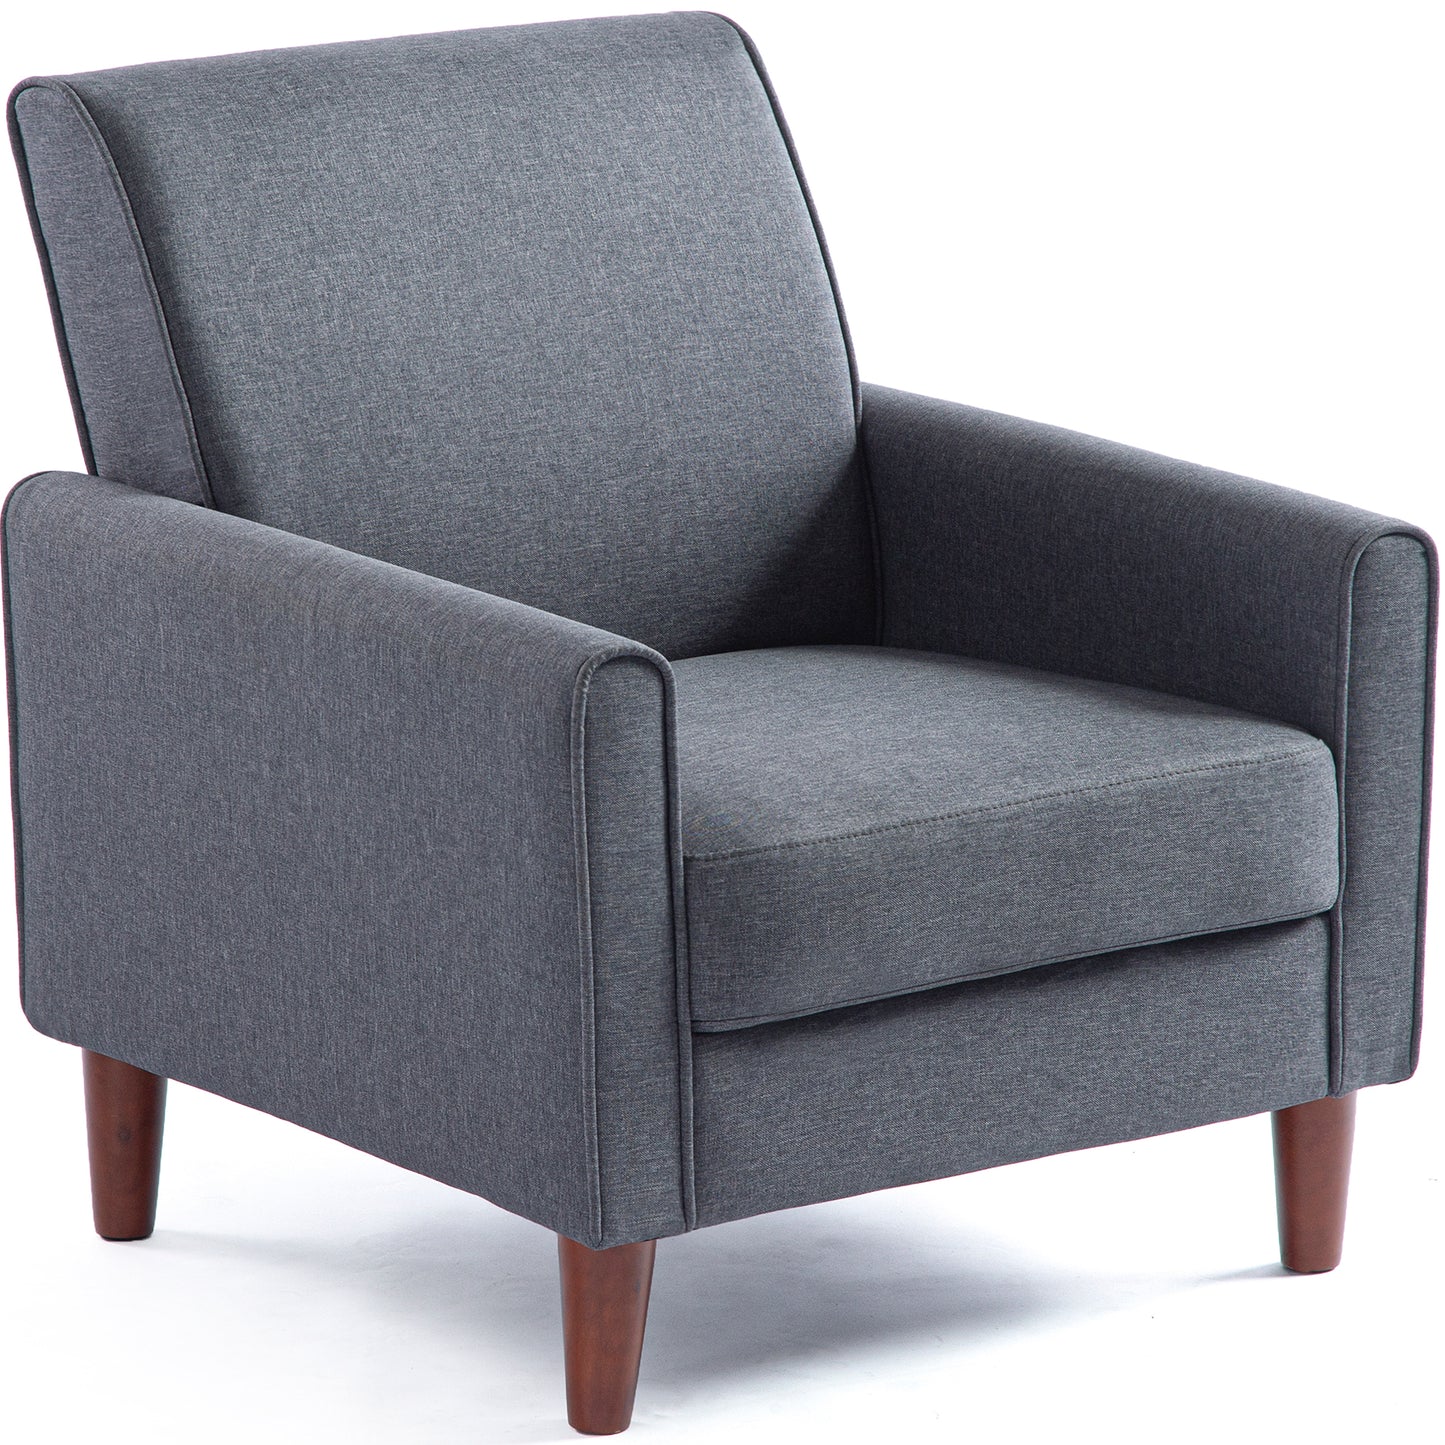 SYNGAR Accent Chair for Living Room, Bedroom Comfy Reading Armchair, Mid Century Modern Arm Chair Soft Linen Upholstered Cozy Side Single Sofa Chair Relaxing Seating, Dark Grey